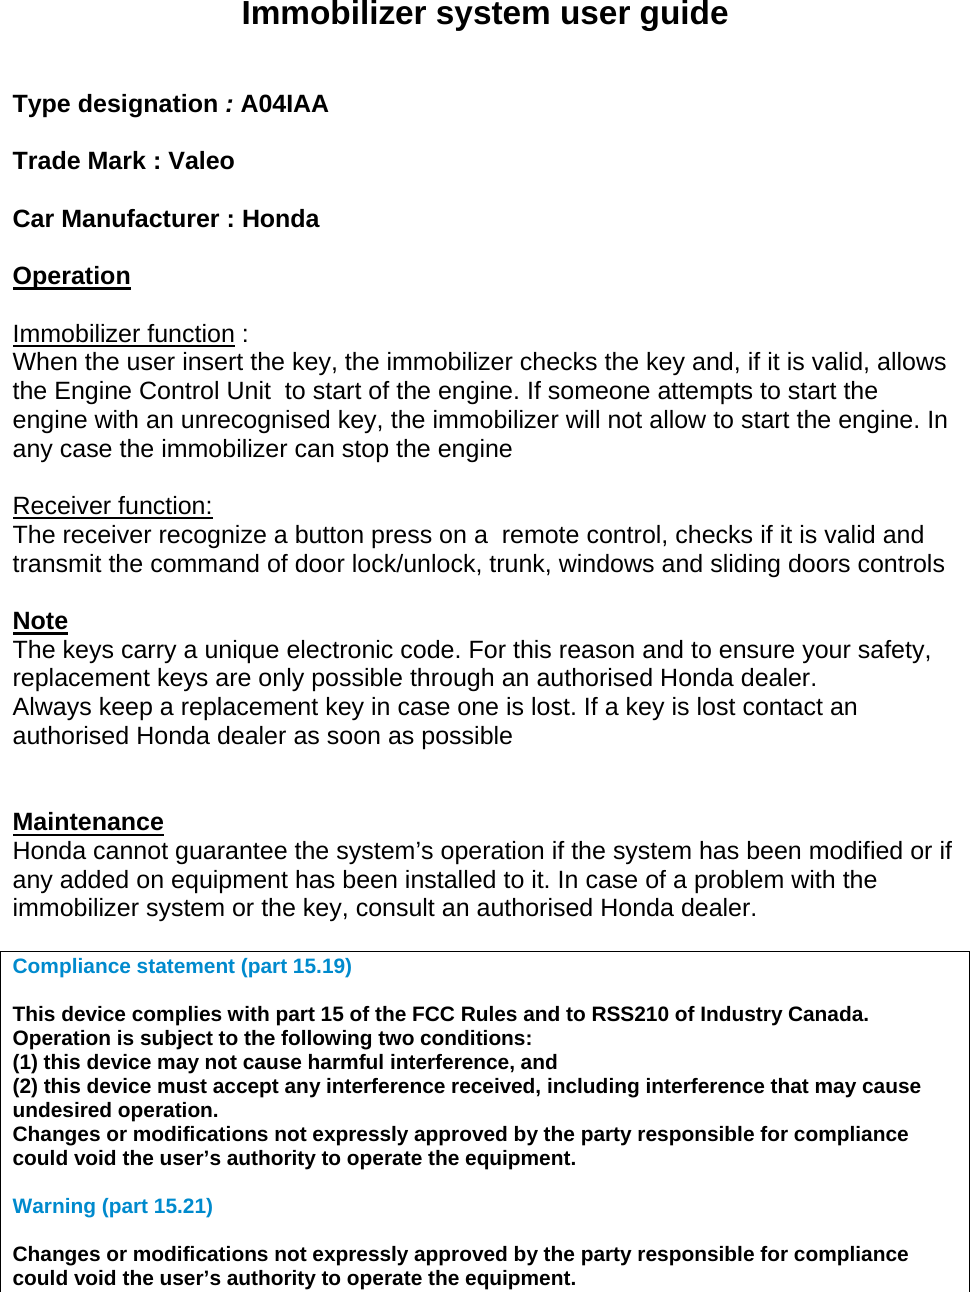   Immobilizer system user guide   Type designation : A04IAA  Trade Mark : Valeo  Car Manufacturer : Honda  Operation  Immobilizer function : When the user insert the key, the immobilizer checks the key and, if it is valid, allows the Engine Control Unit  to start of the engine. If someone attempts to start the engine with an unrecognised key, the immobilizer will not allow to start the engine. In any case the immobilizer can stop the engine  Receiver function: The receiver recognize a button press on a  remote control, checks if it is valid and  transmit the command of door lock/unlock, trunk, windows and sliding doors controls  Note  The keys carry a unique electronic code. For this reason and to ensure your safety, replacement keys are only possible through an authorised Honda dealer. Always keep a replacement key in case one is lost. If a key is lost contact an authorised Honda dealer as soon as possible   Maintenance Honda cannot guarantee the system’s operation if the system has been modified or if any added on equipment has been installed to it. In case of a problem with the immobilizer system or the key, consult an authorised Honda dealer.  Compliance statement (part 15.19)   This device complies with part 15 of the FCC Rules and to RSS210 of Industry Canada. Operation is subject to the following two conditions: (1) this device may not cause harmful interference, and (2) this device must accept any interference received, including interference that may cause undesired operation. Changes or modifications not expressly approved by the party responsible for compliance could void the user’s authority to operate the equipment.  Warning (part 15.21)  Changes or modifications not expressly approved by the party responsible for compliance could void the user’s authority to operate the equipment.   